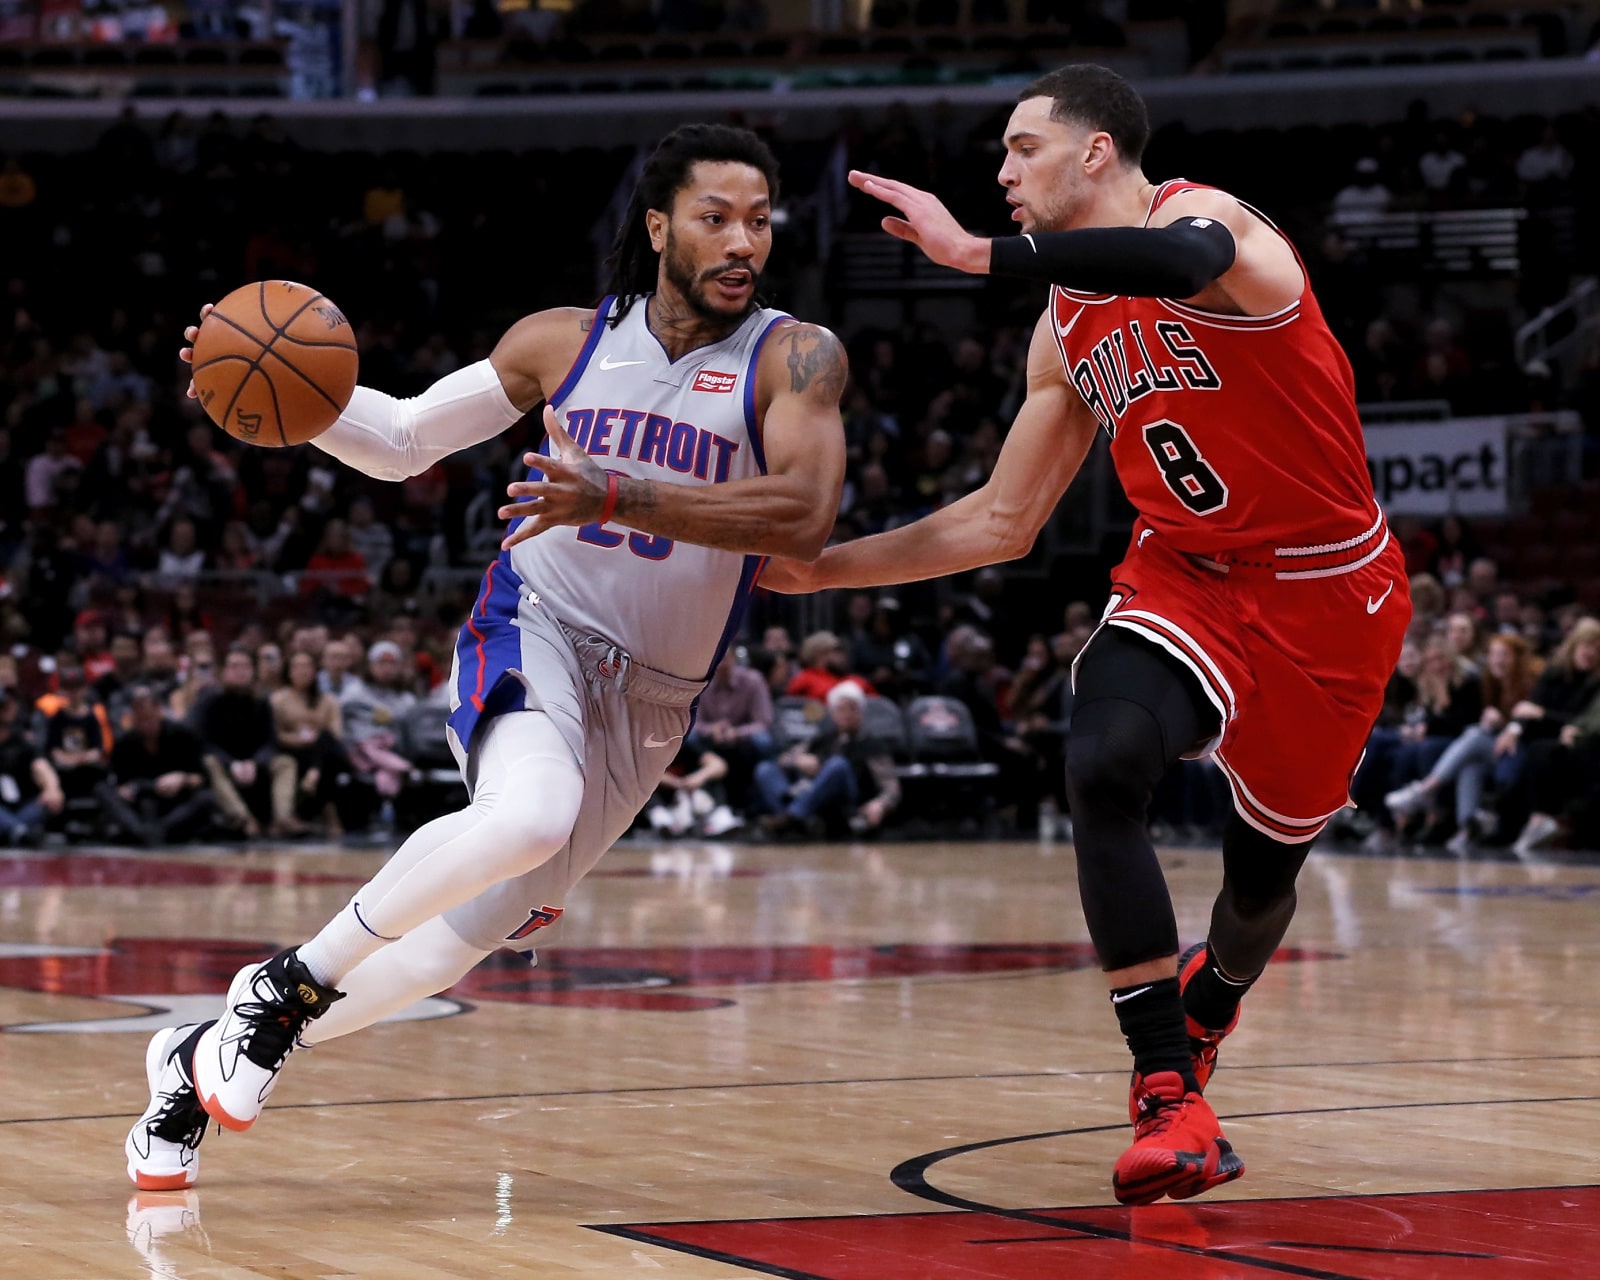 Former NBA Player Claims Zach Lavine And Derrick Rose Would Have Been “Pick Your Poison” Backcourt